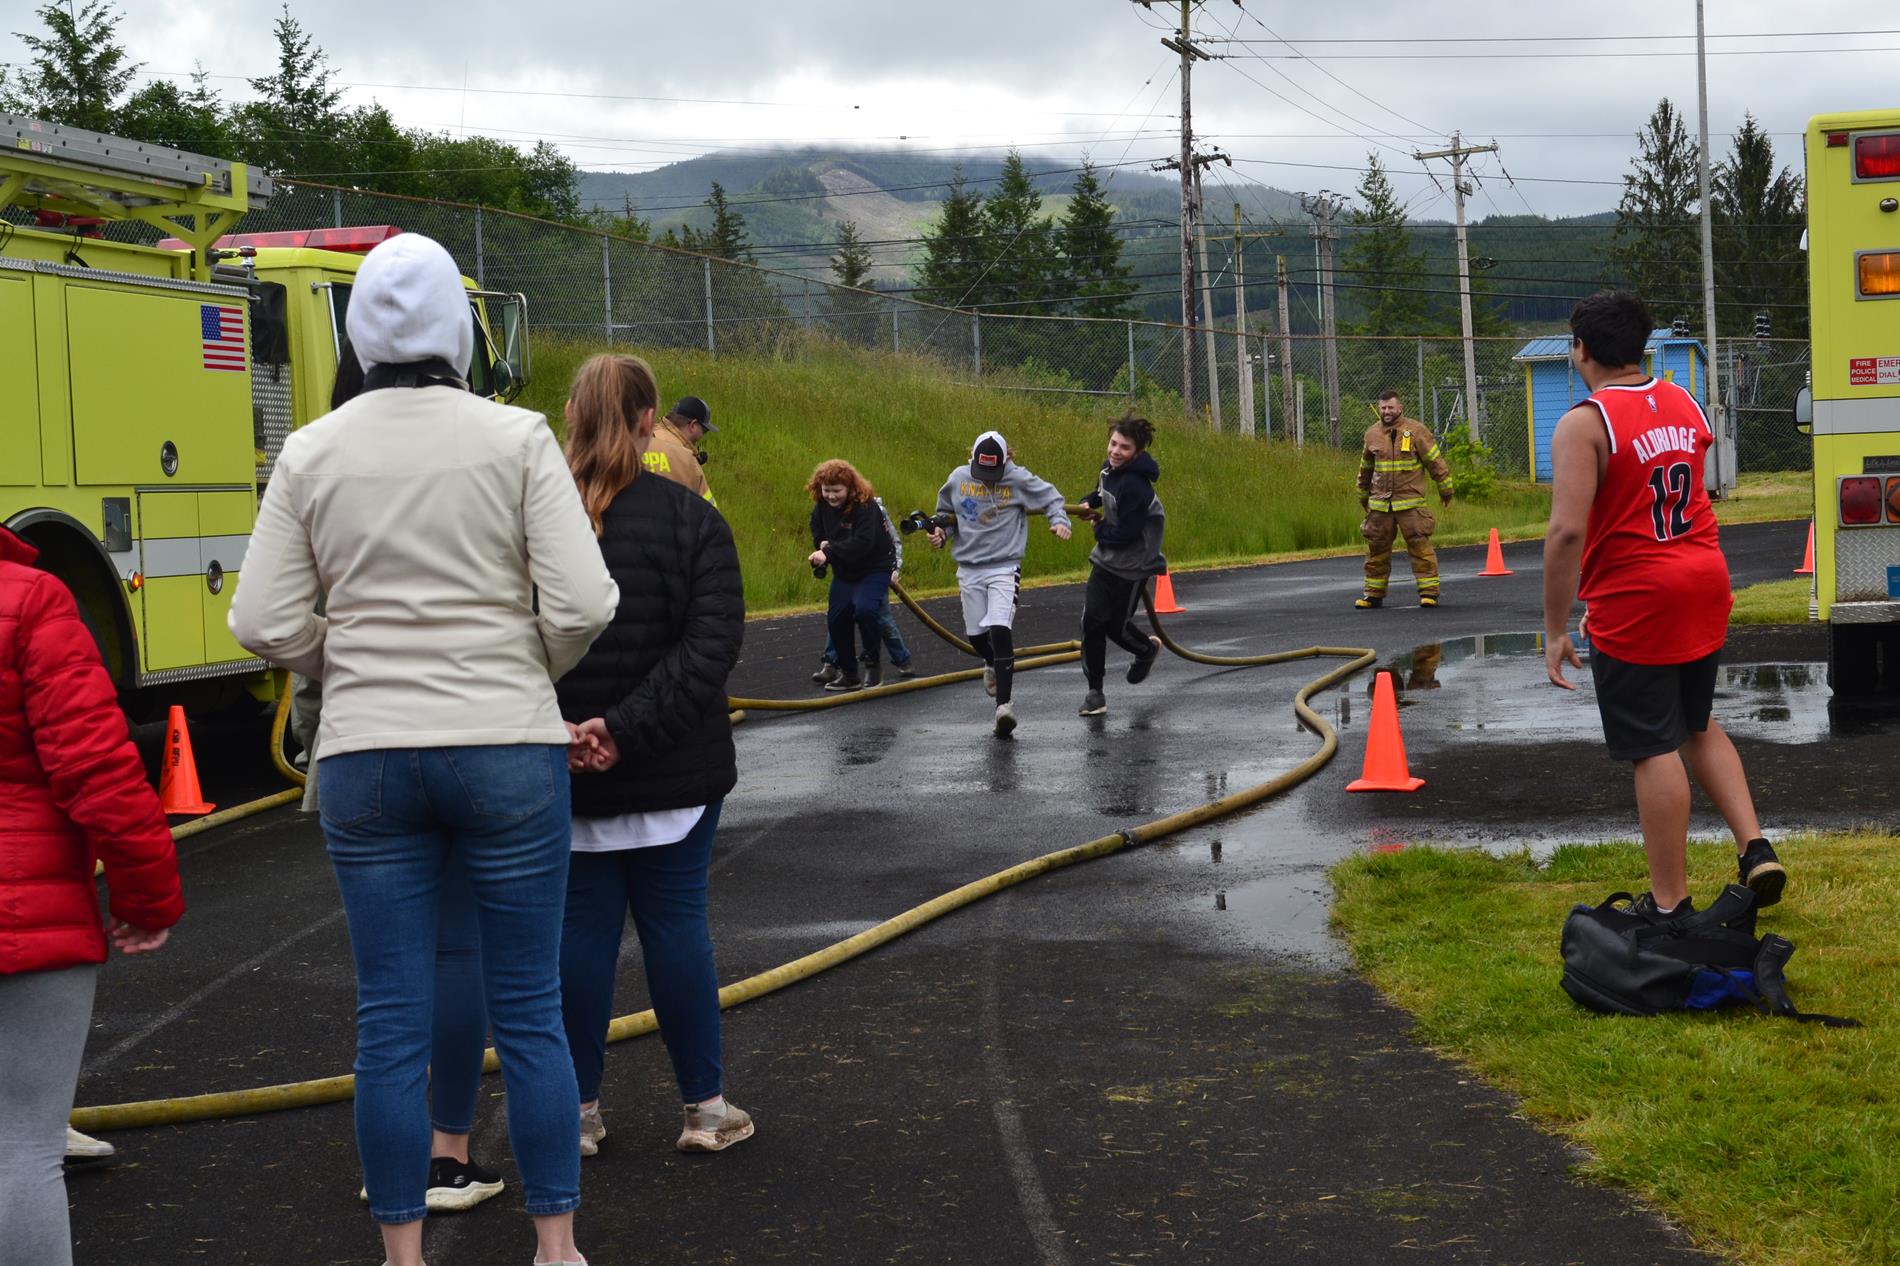 5th graders participating in the fire hose relay